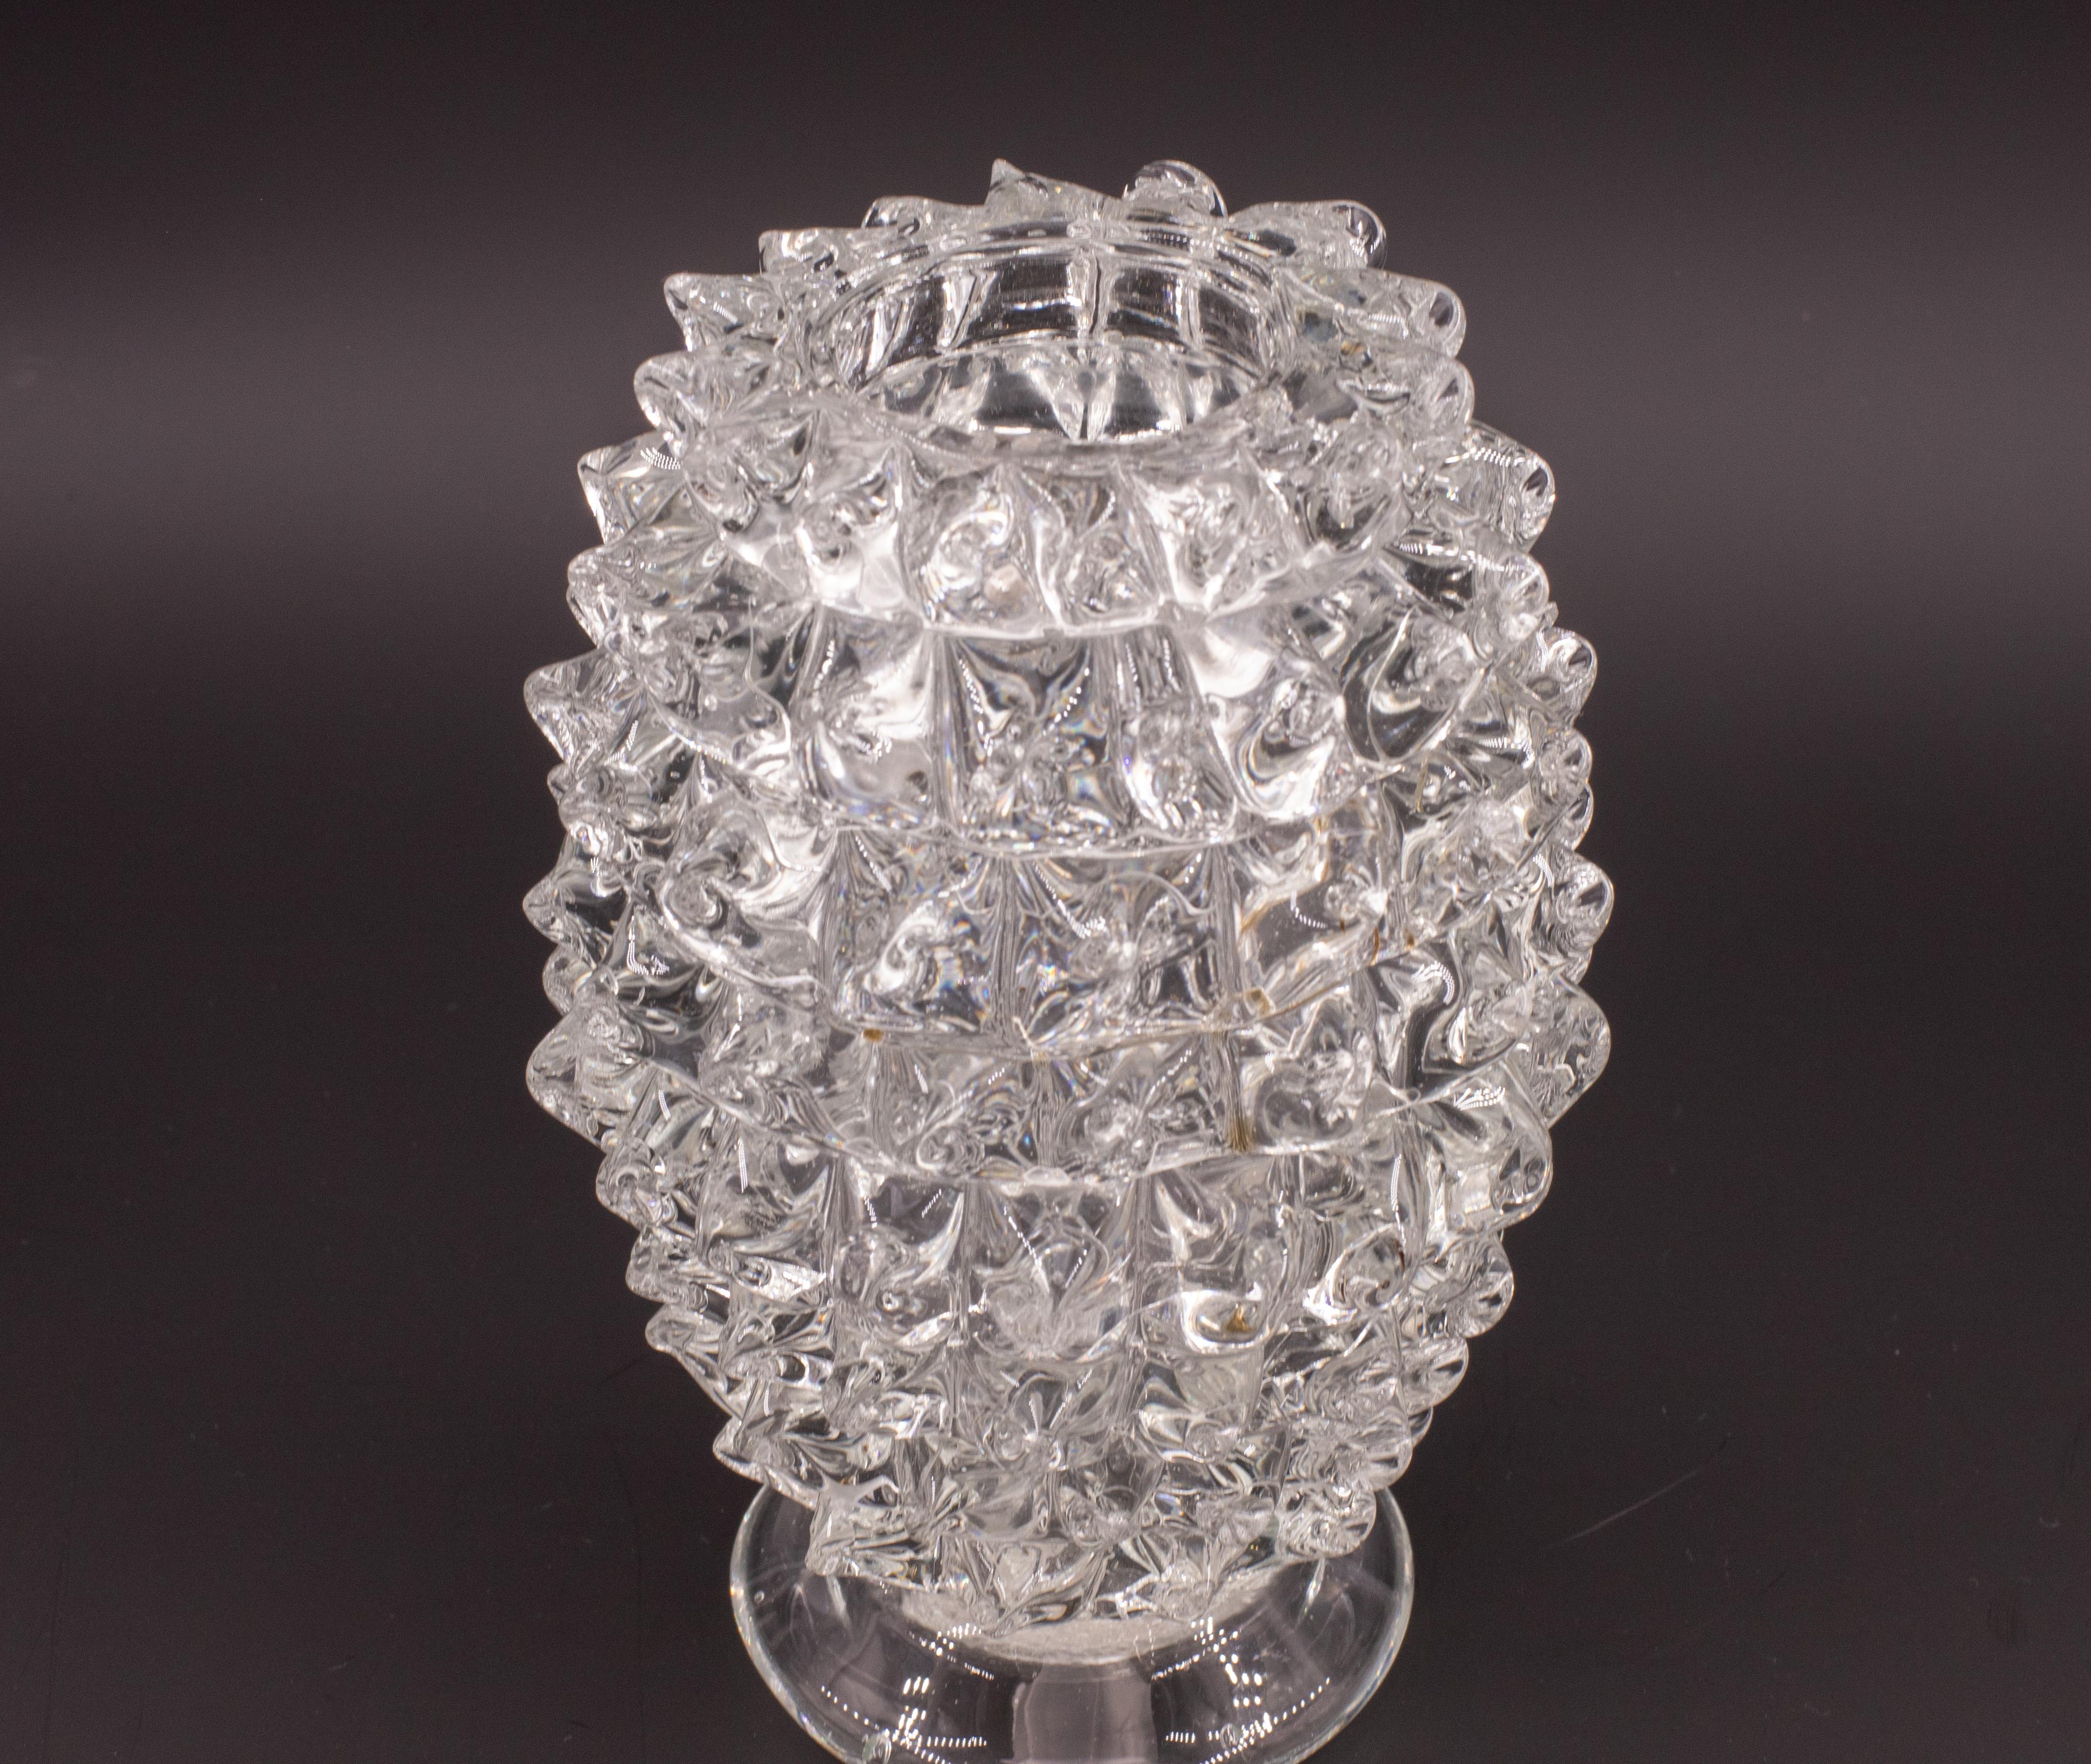 Amazing midcentury mouth-blown rostrato crystal Murano glass vase. This wonderful object was produced during the 1940s in Italy by Ercole Barovier for Barovier & Toso.

This masterpiece is a fantastic tribute to the incredible workmanship of the